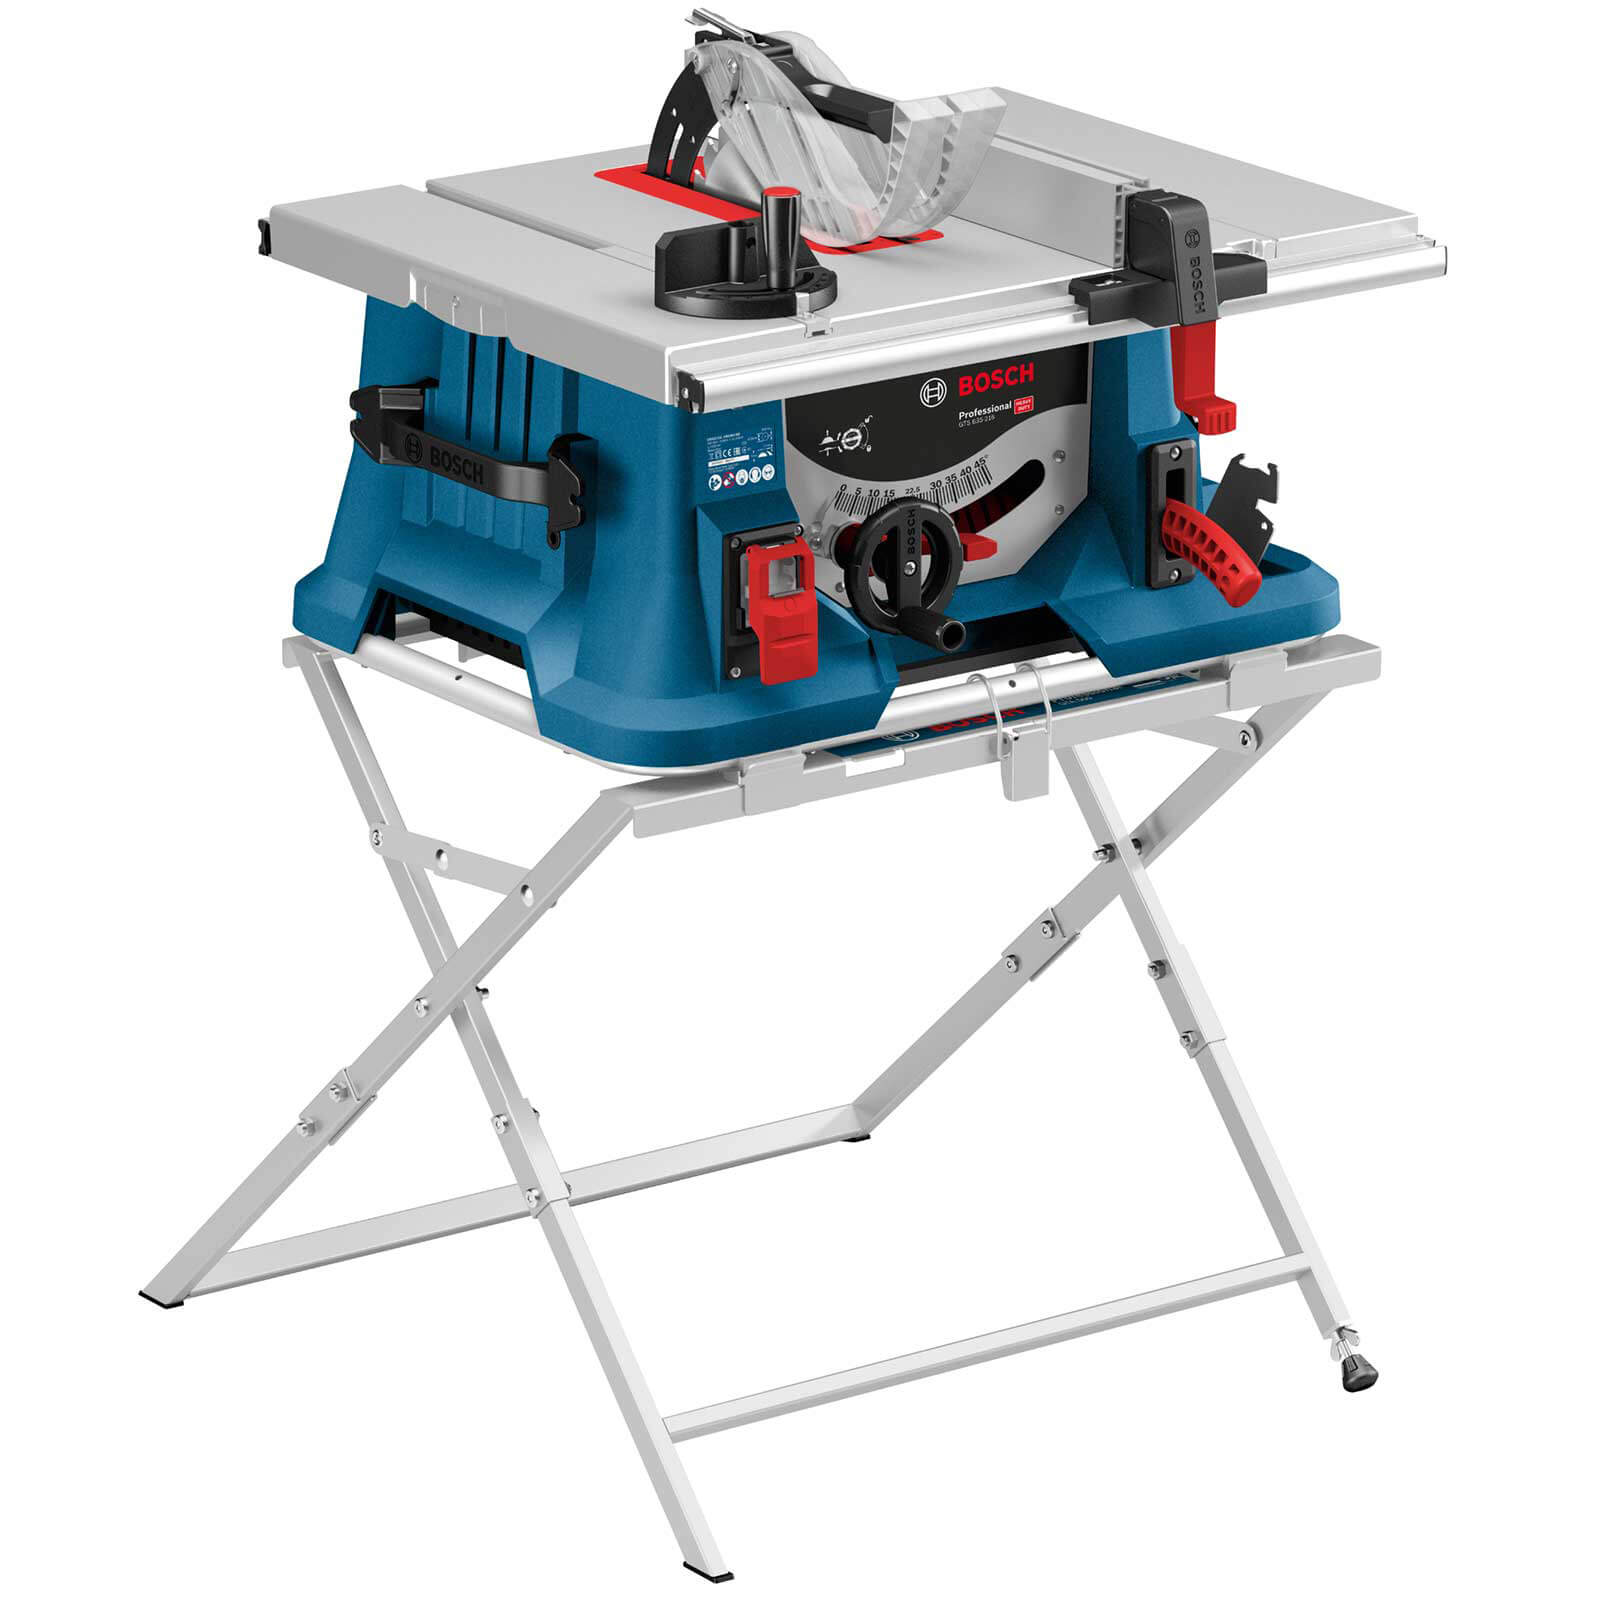 Bosch GTS 635-216 Table Saw and GTA560 Saw Stand 240v